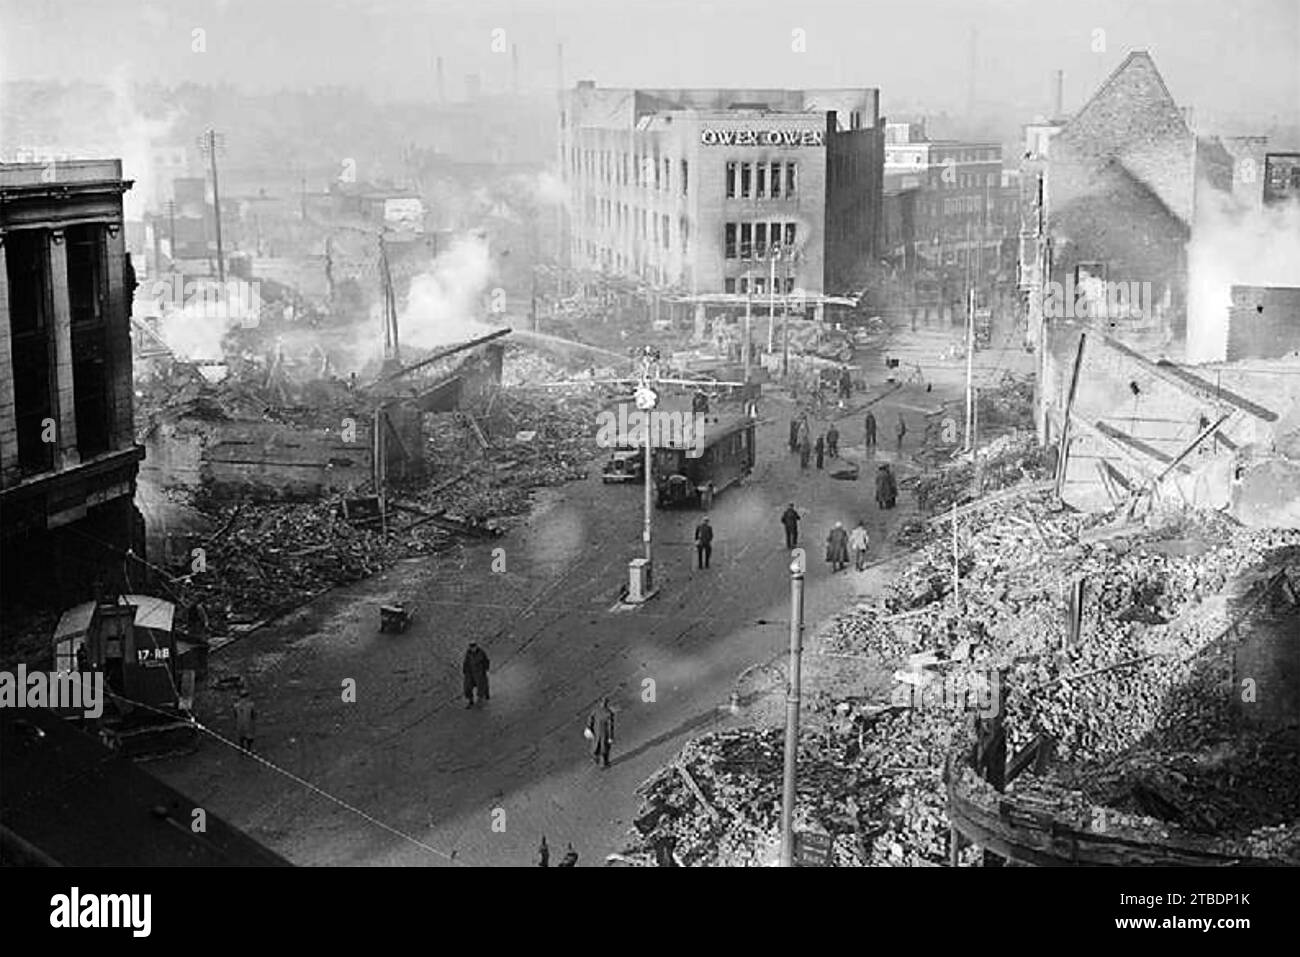 COVENTRY The city centre after the blitz of 14/15 November 1940. the newly opened Owen Owen department store is top centre. Stock Photo